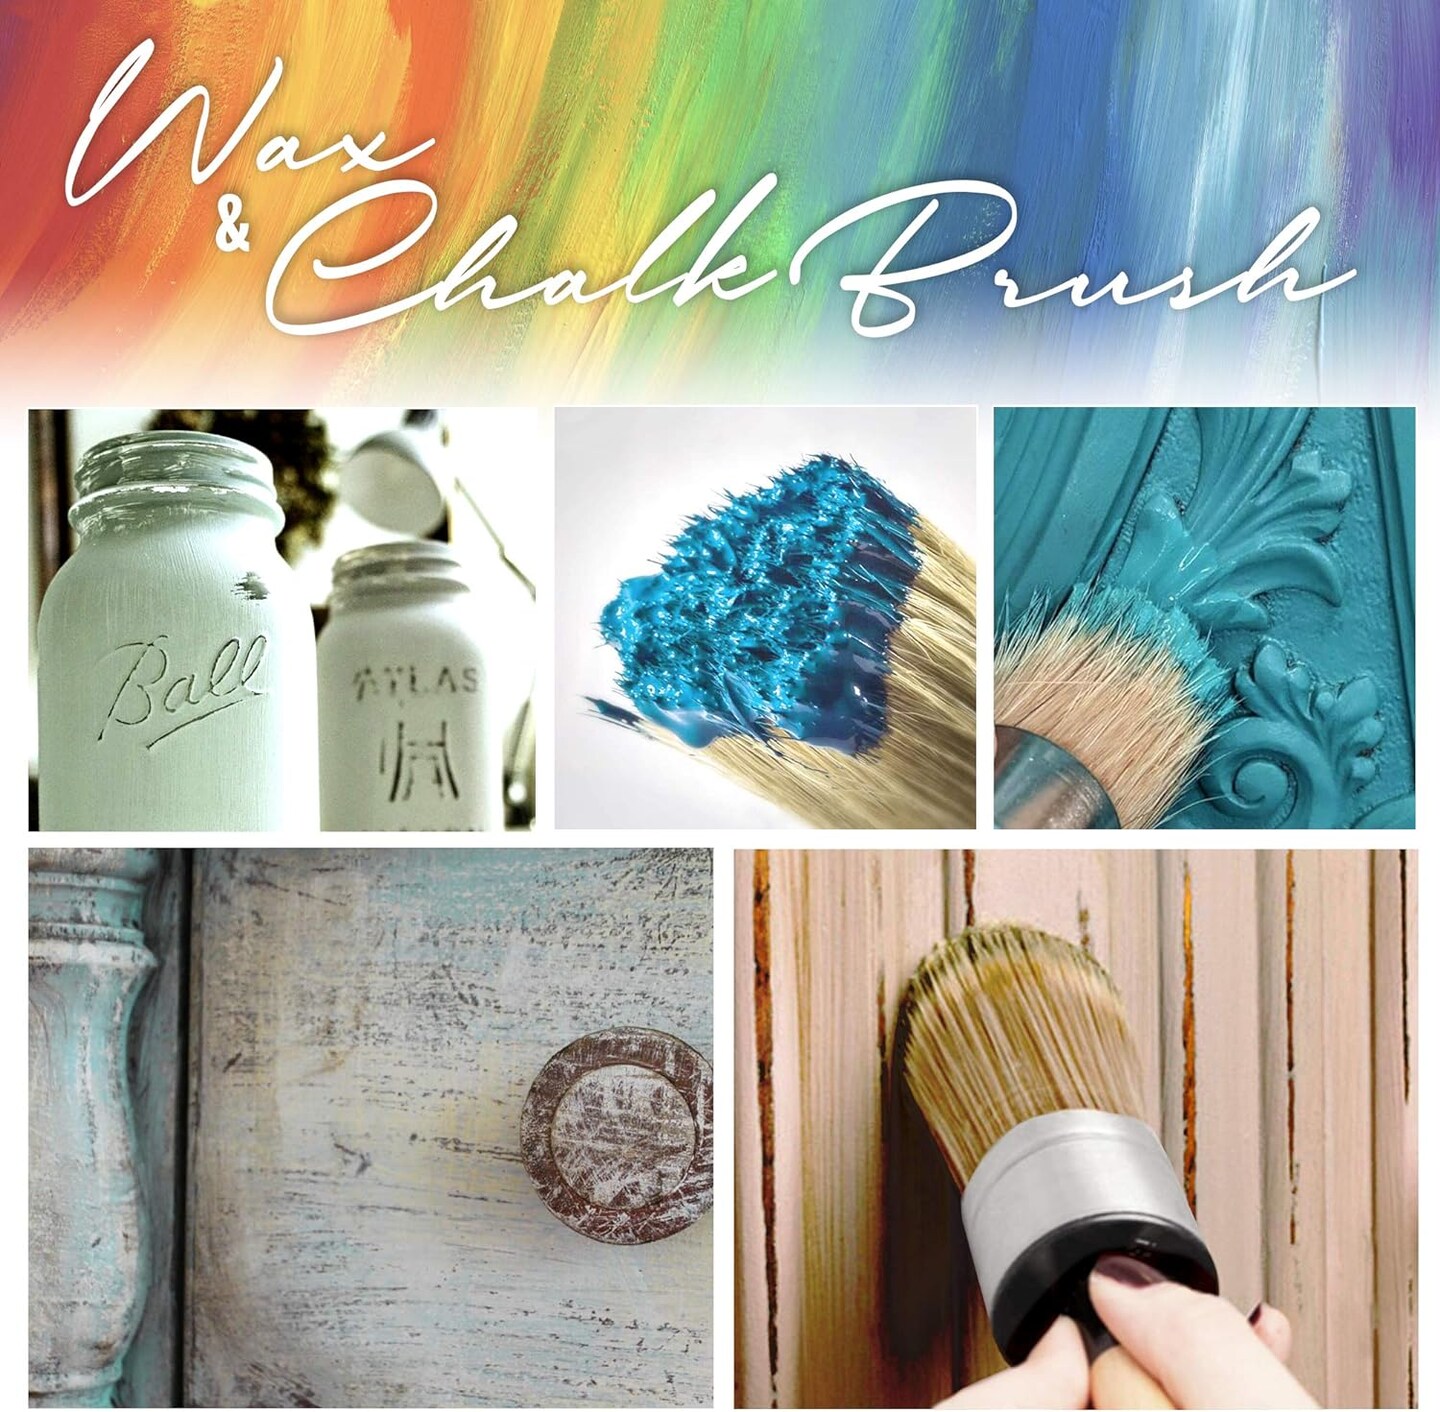 Chalk Furniture Paint Brushes for Furniture Painting, Milk Paint, Wax, Stencil Brushes, Home Furniture Paint - 2 Piece Round Chalked Paint Brushes Set